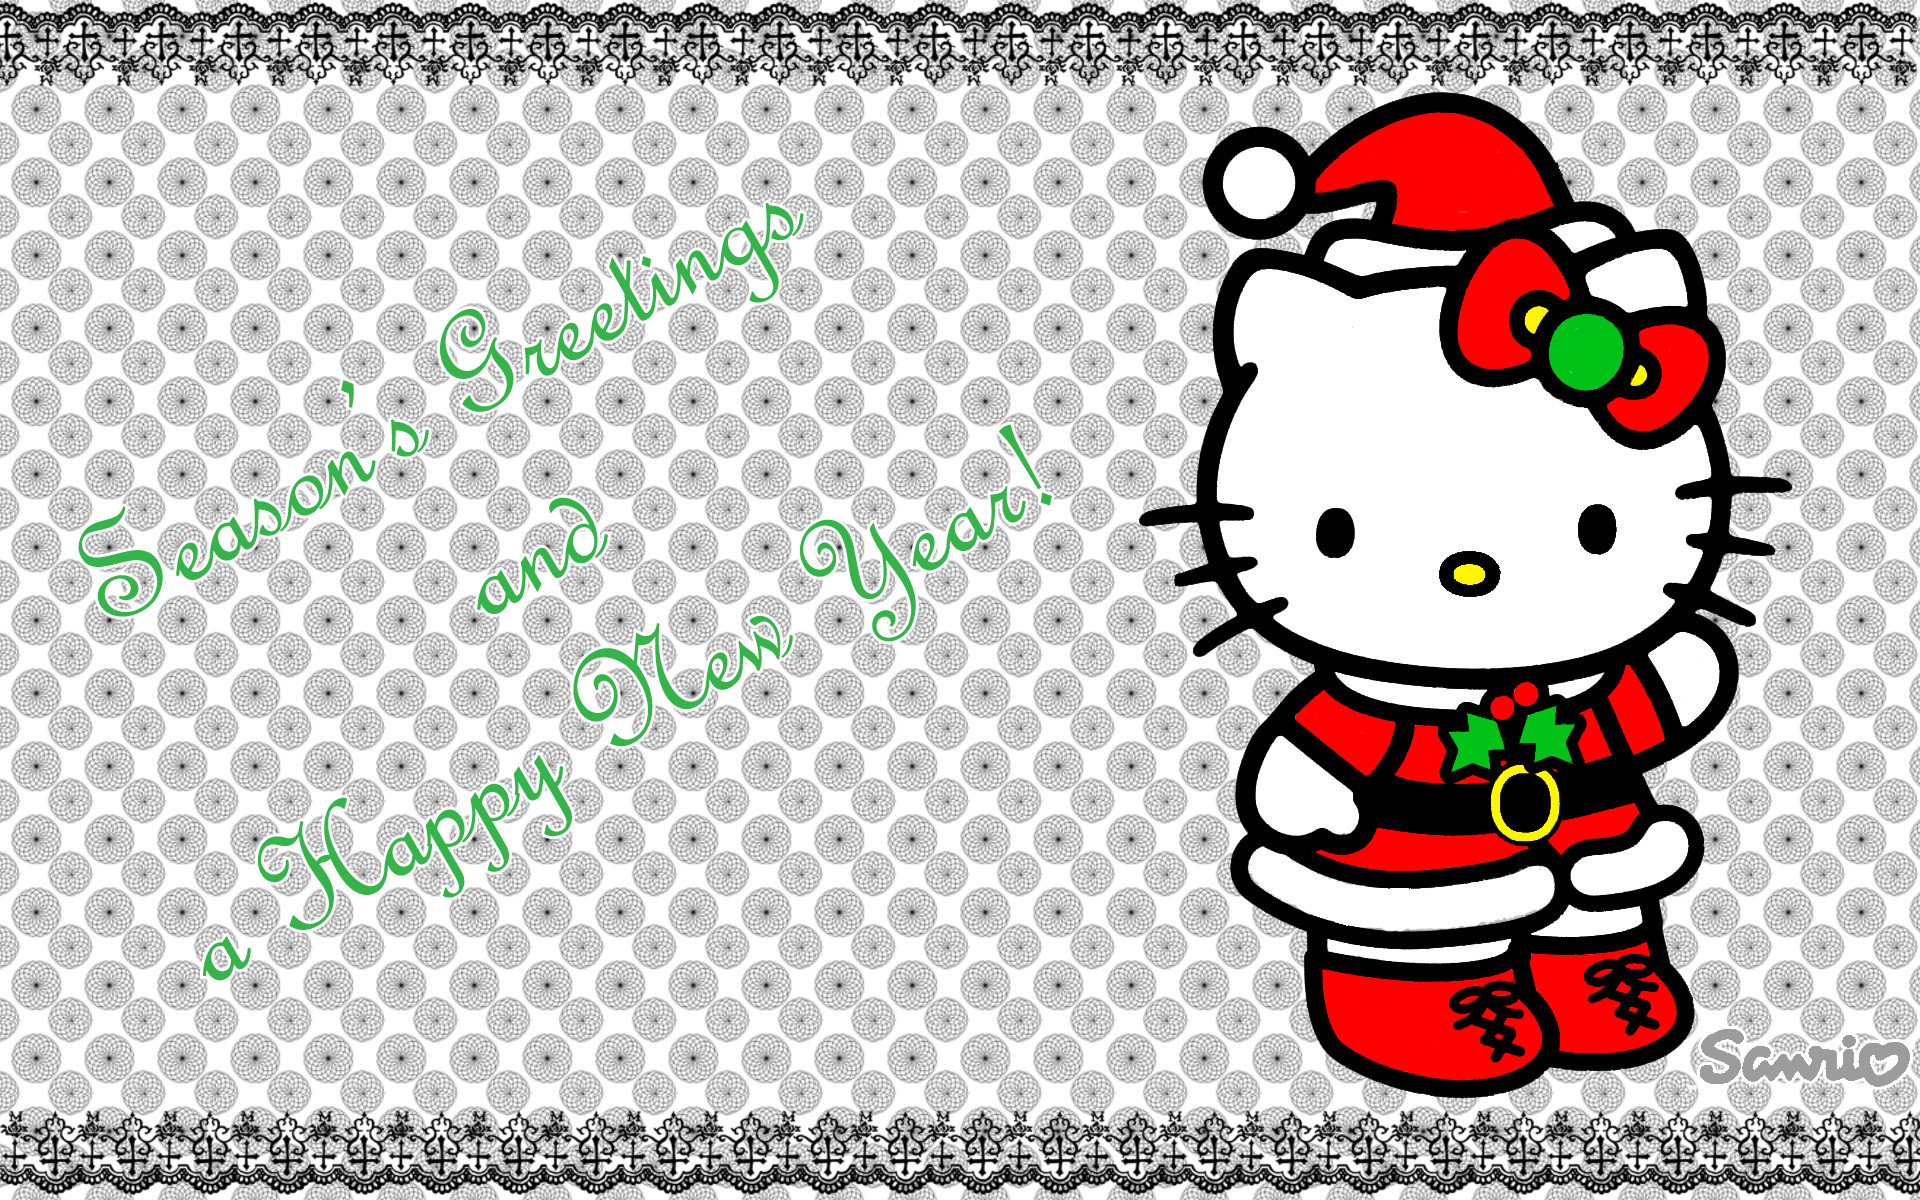 1920x1200 Hello Kitty XMas Wallpaper by kittyloaf160 Hello Kitty XMas Wallpaper by  kittyloaf160